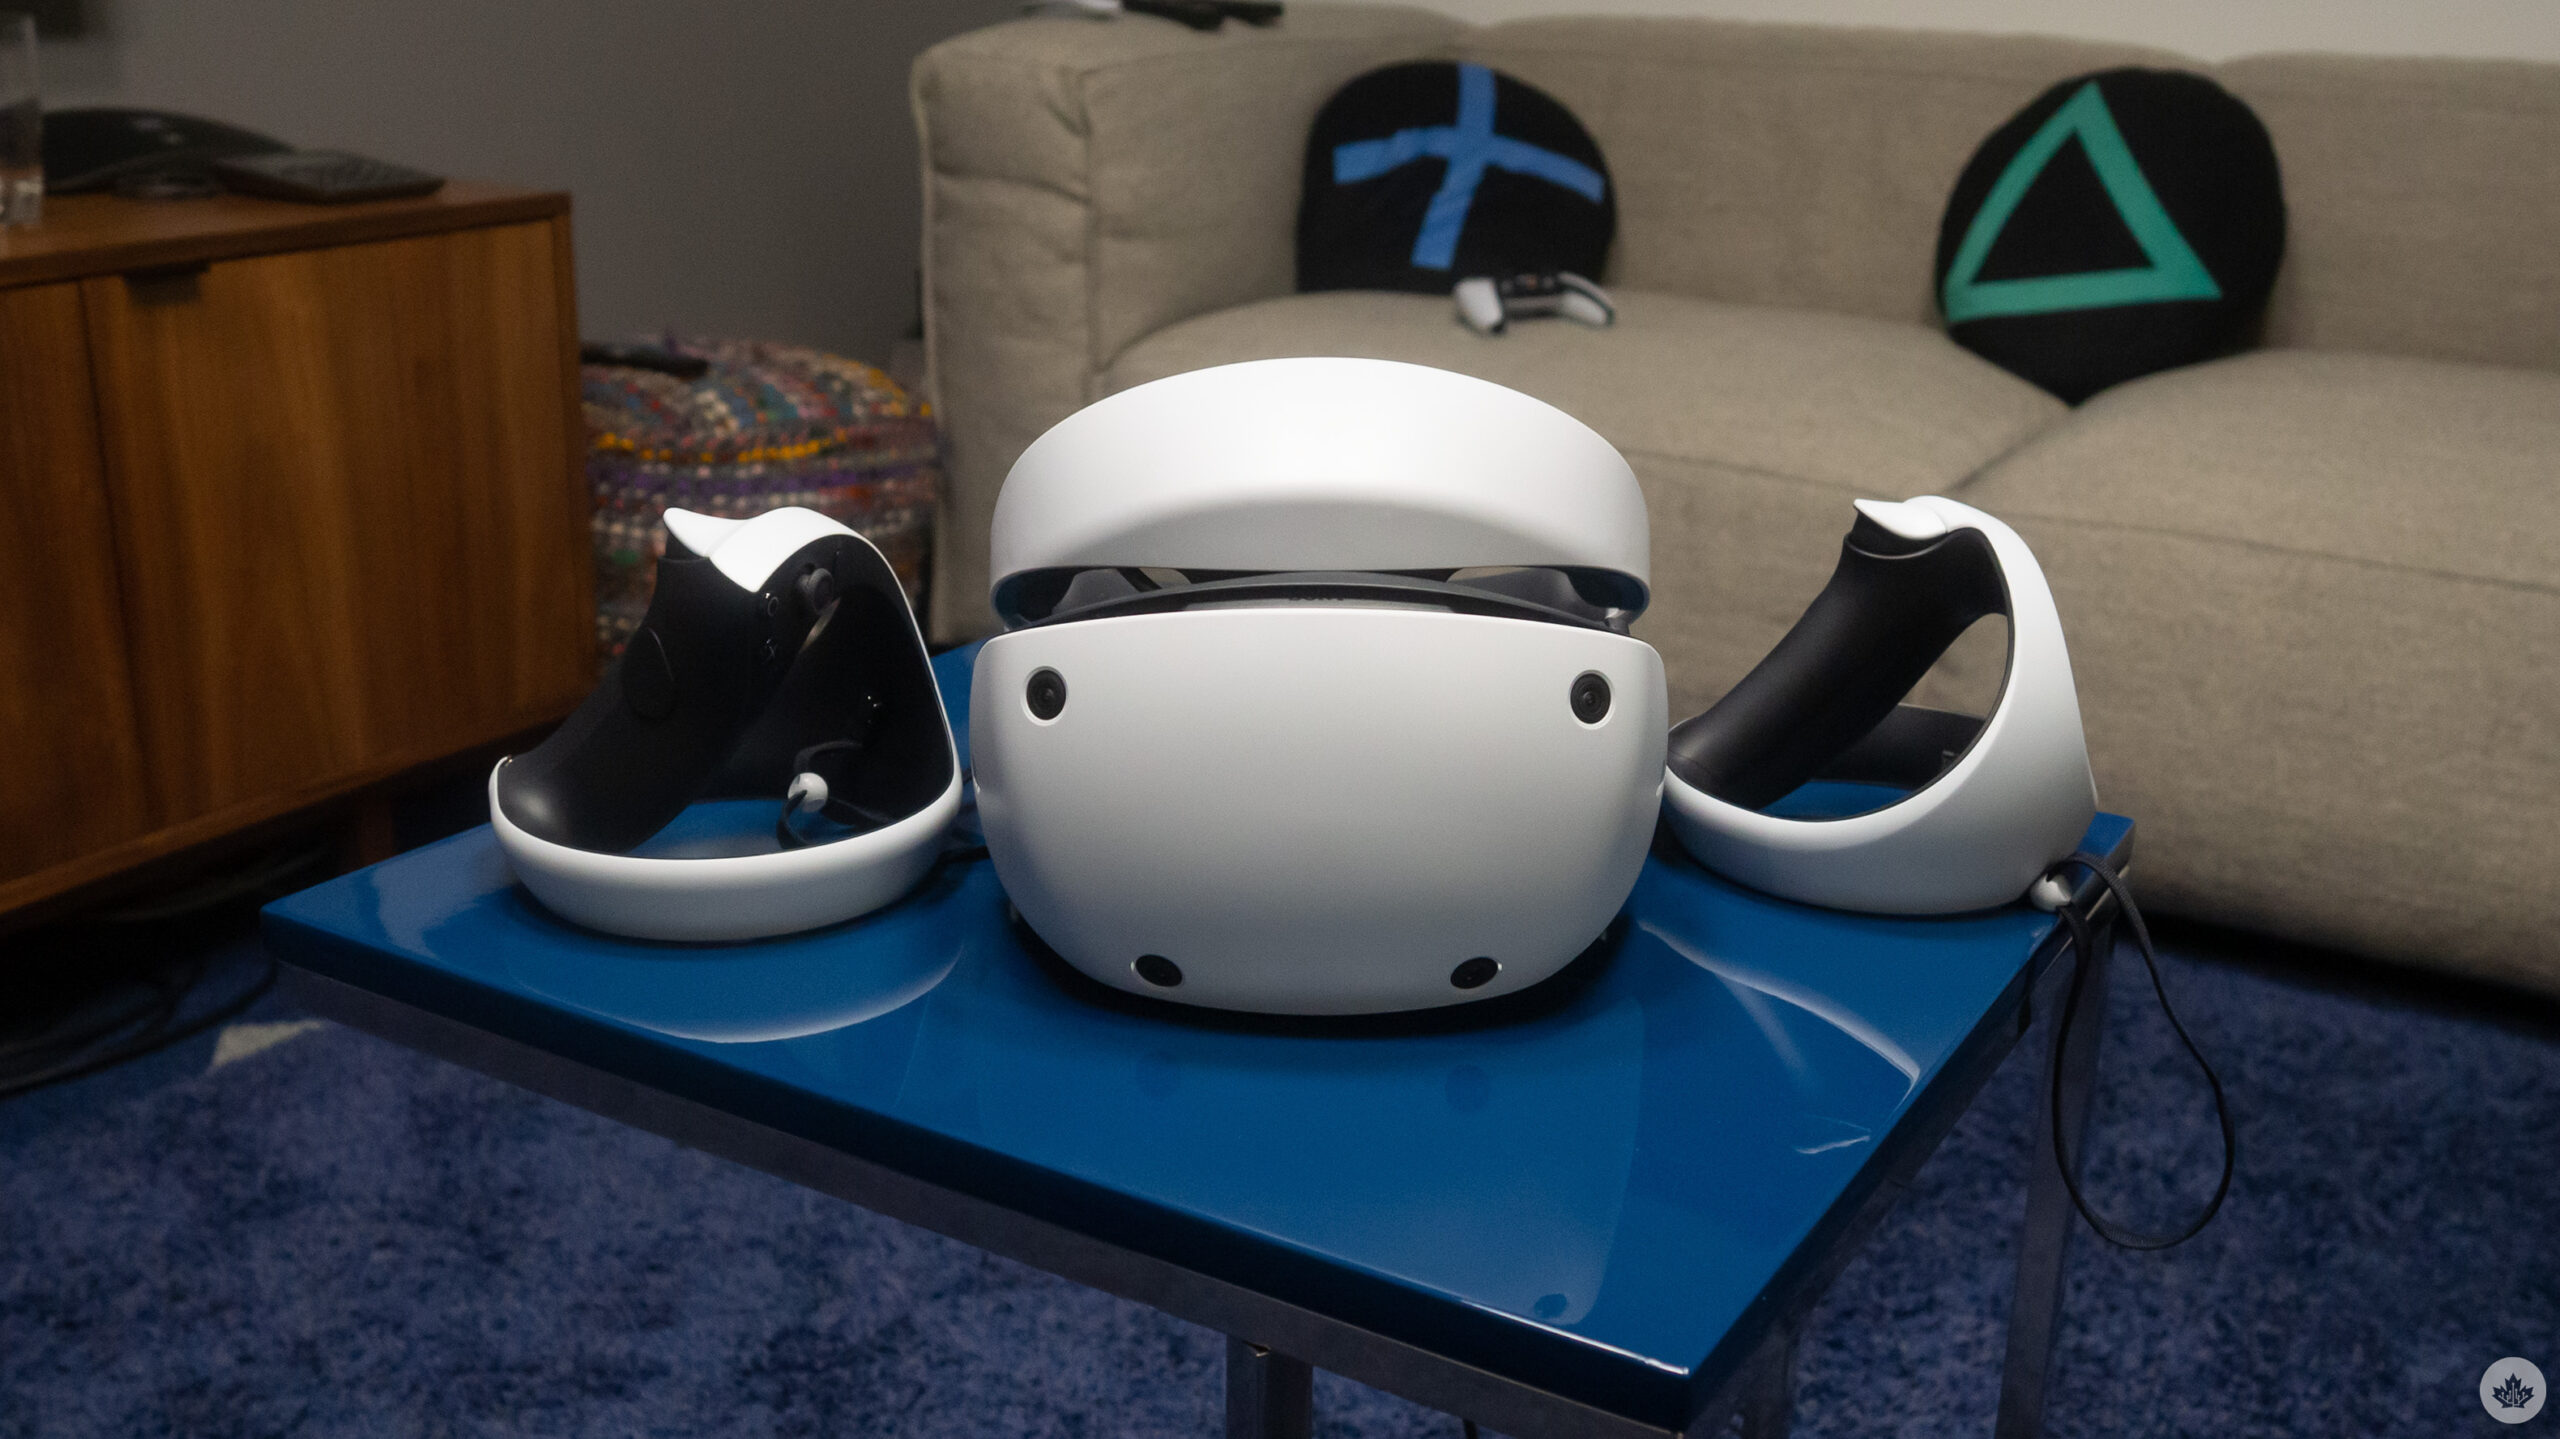 PlayStation VR2 headset on table